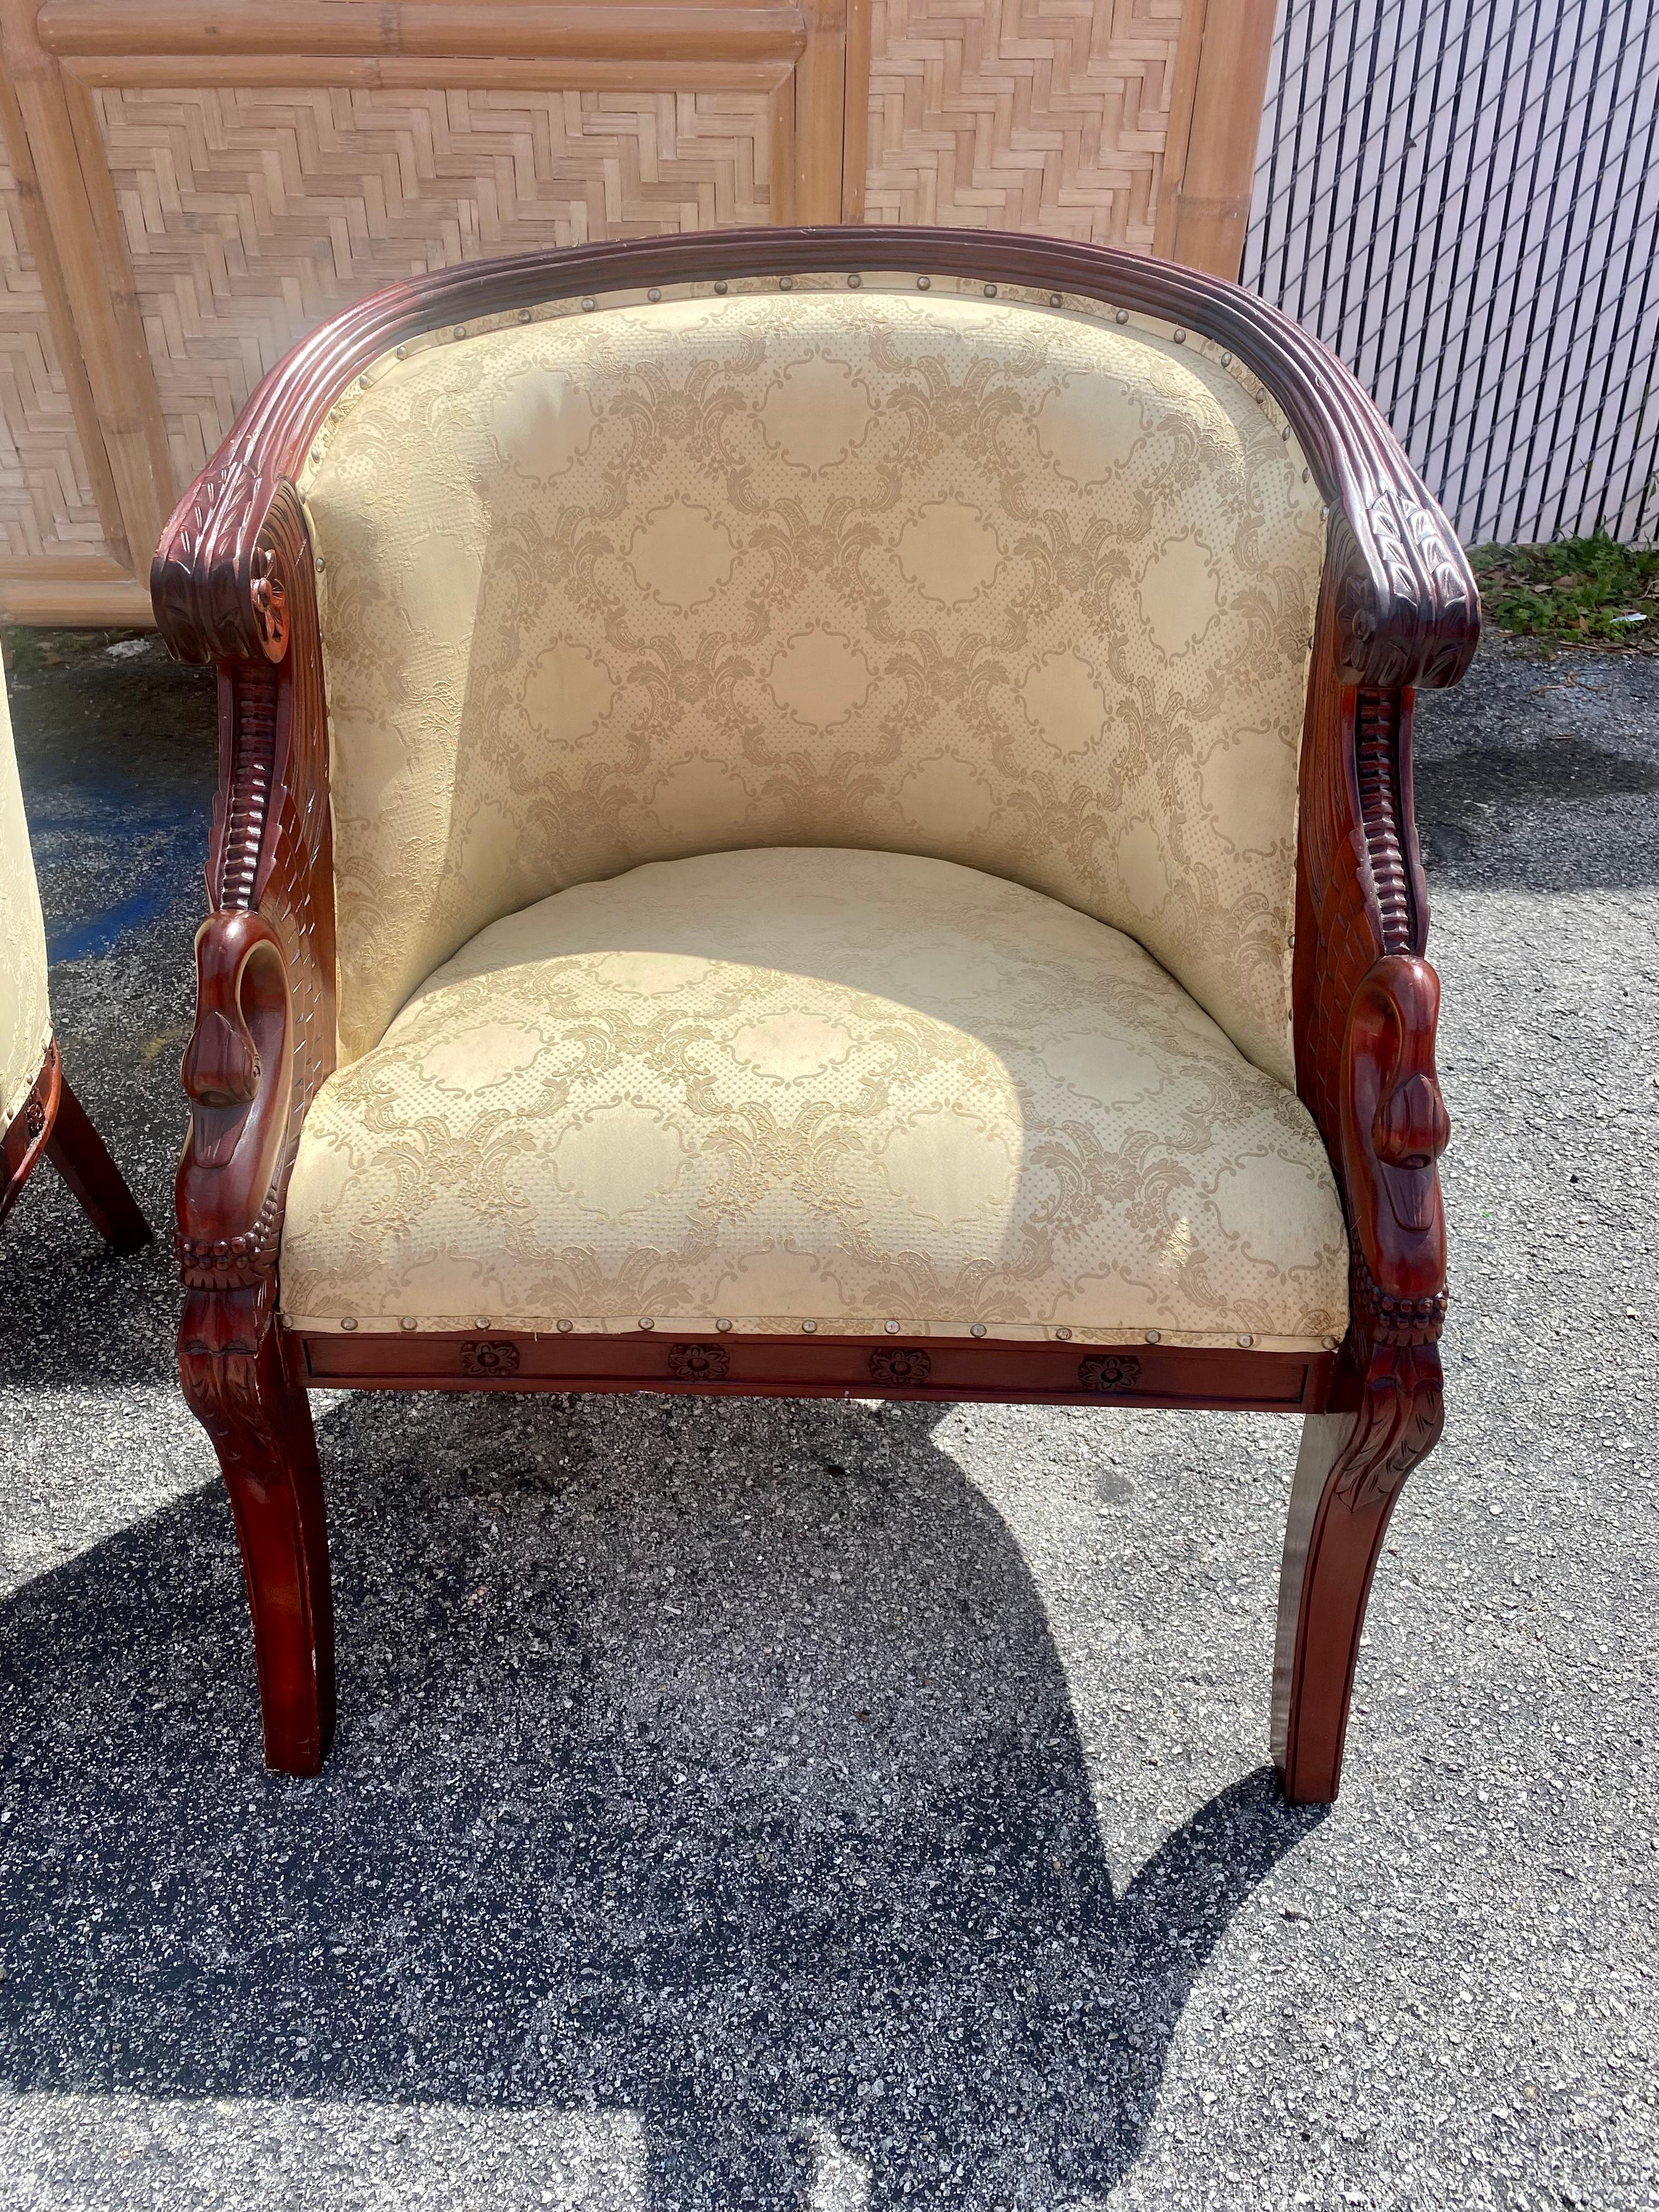 1940s Carved Gilt Wood Swan Barrel Chairs, Set of 2 For Sale 4